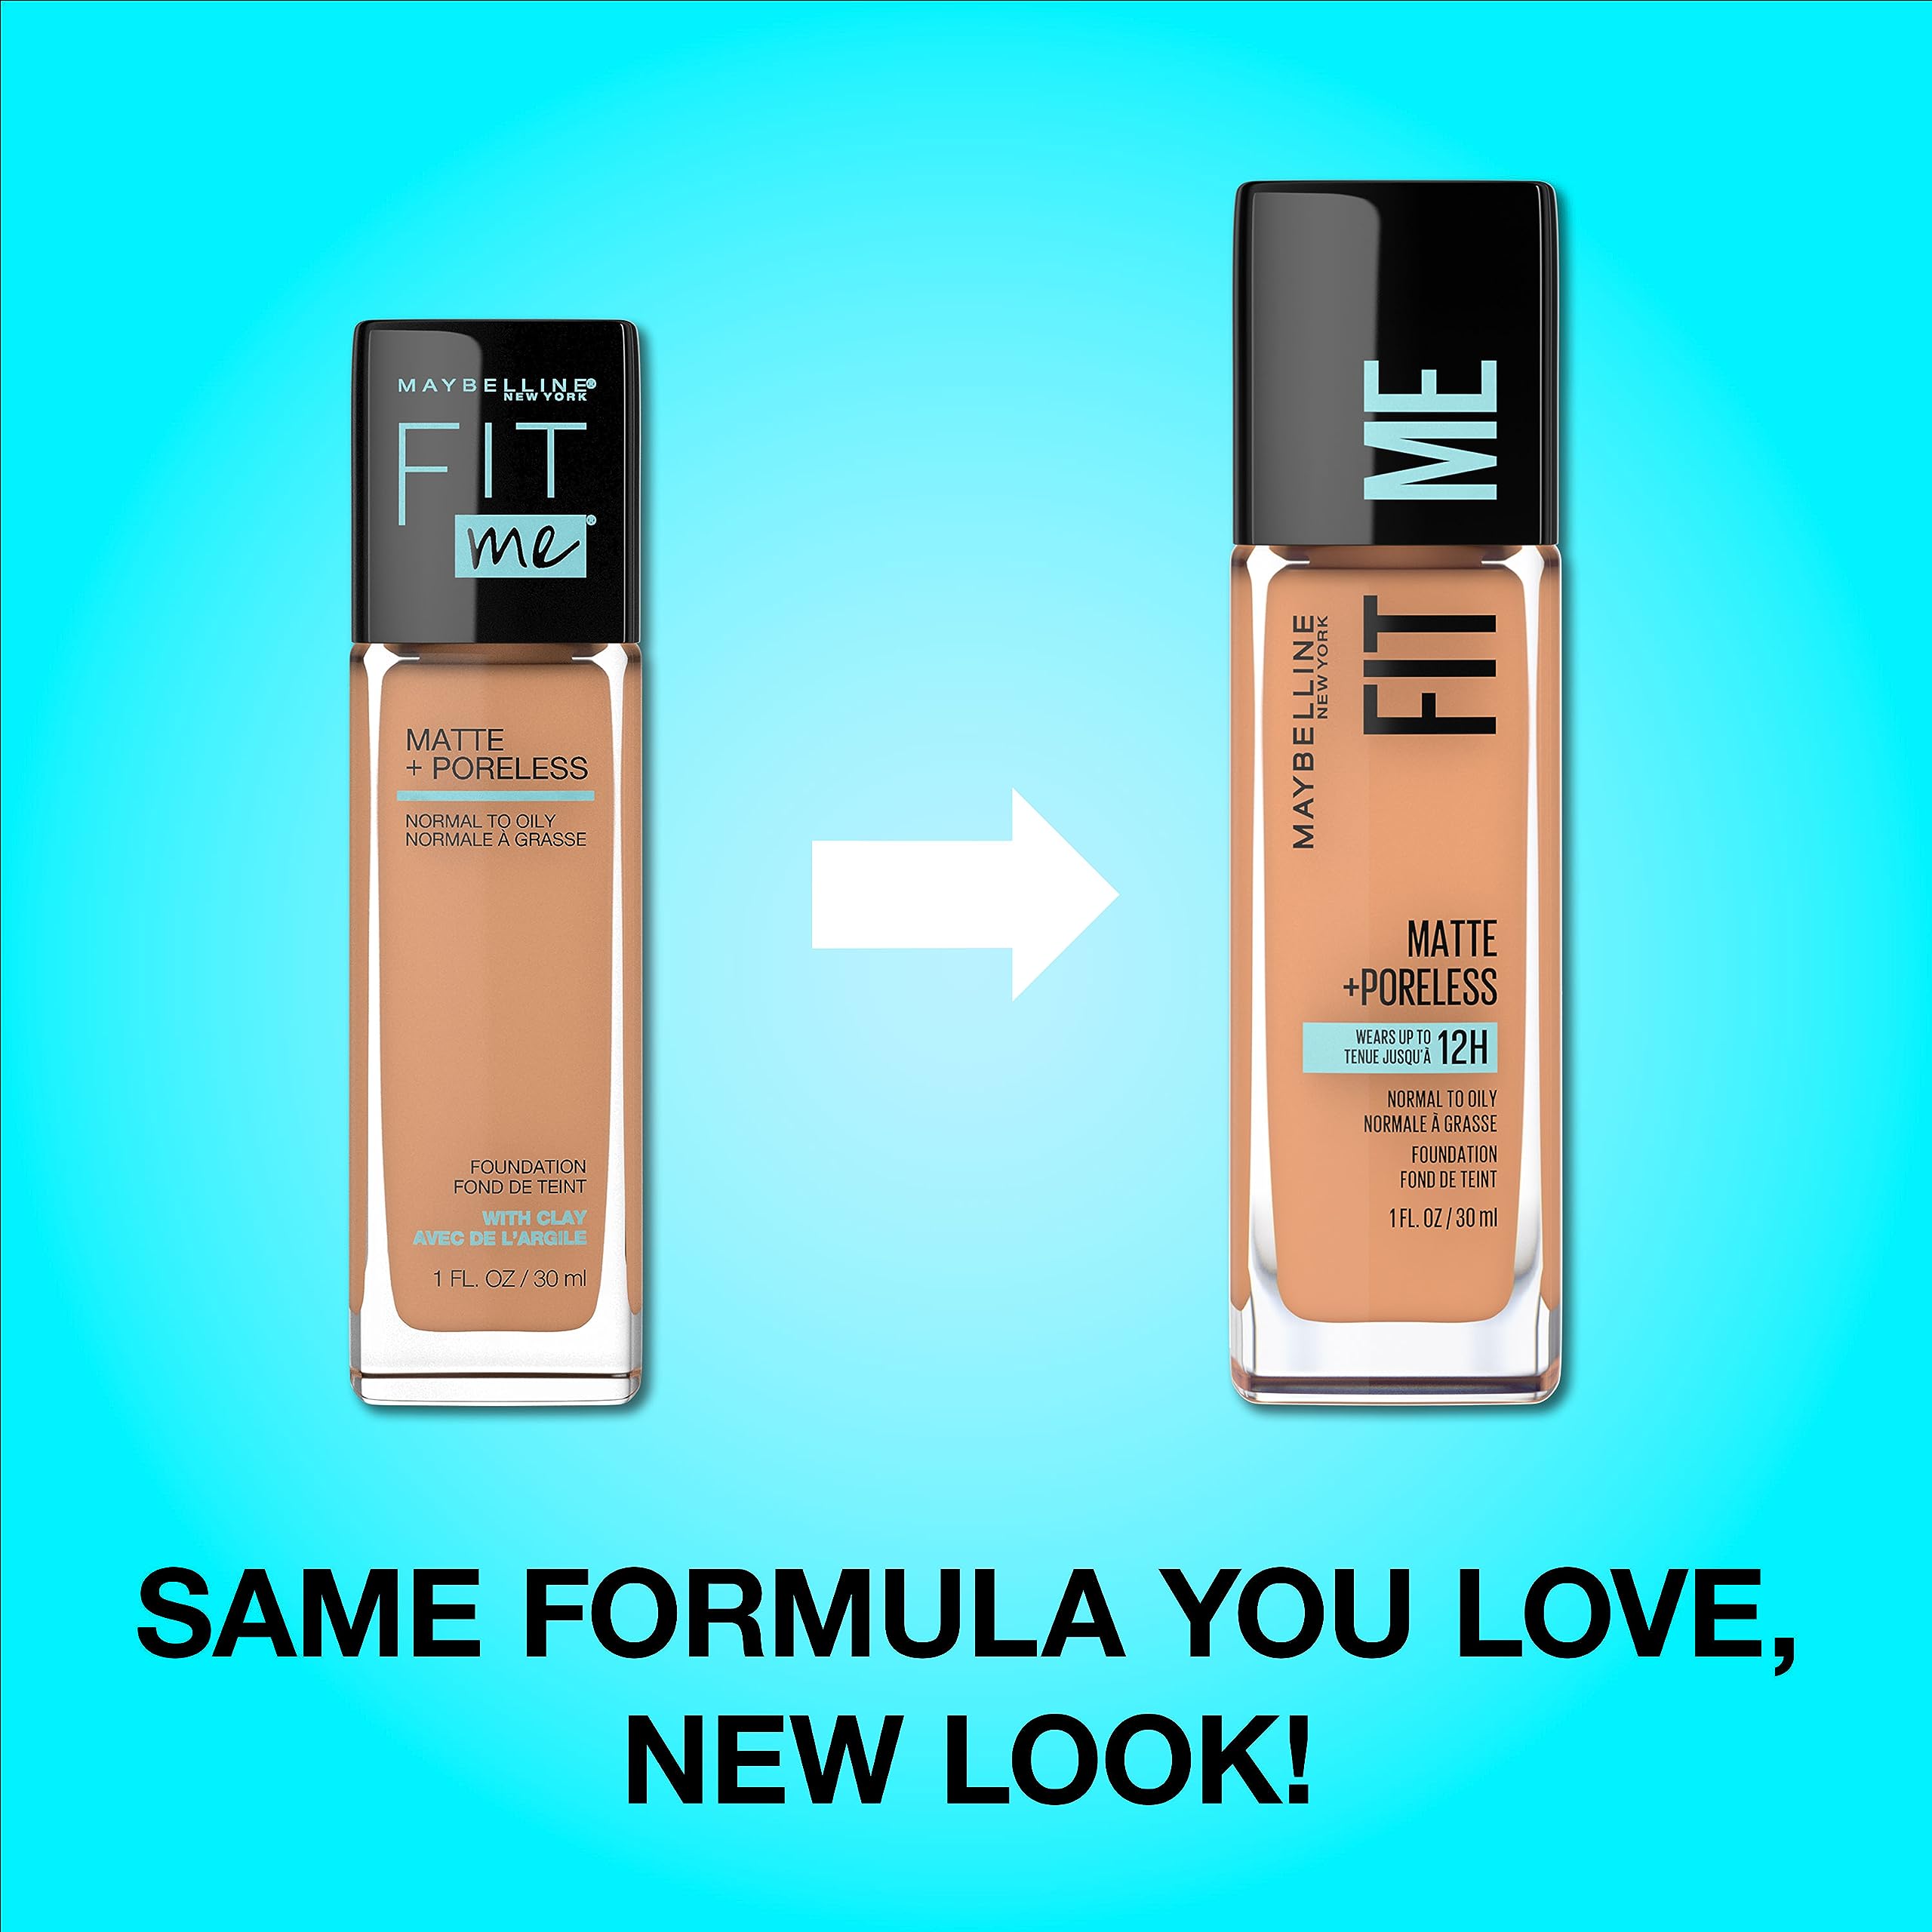 Maybelline New York Maybelline Fit Me Matte + Poreless Liquid Oil-Free Foundation Makeup, Creamy Beige, 1 Count (Packaging May Vary)